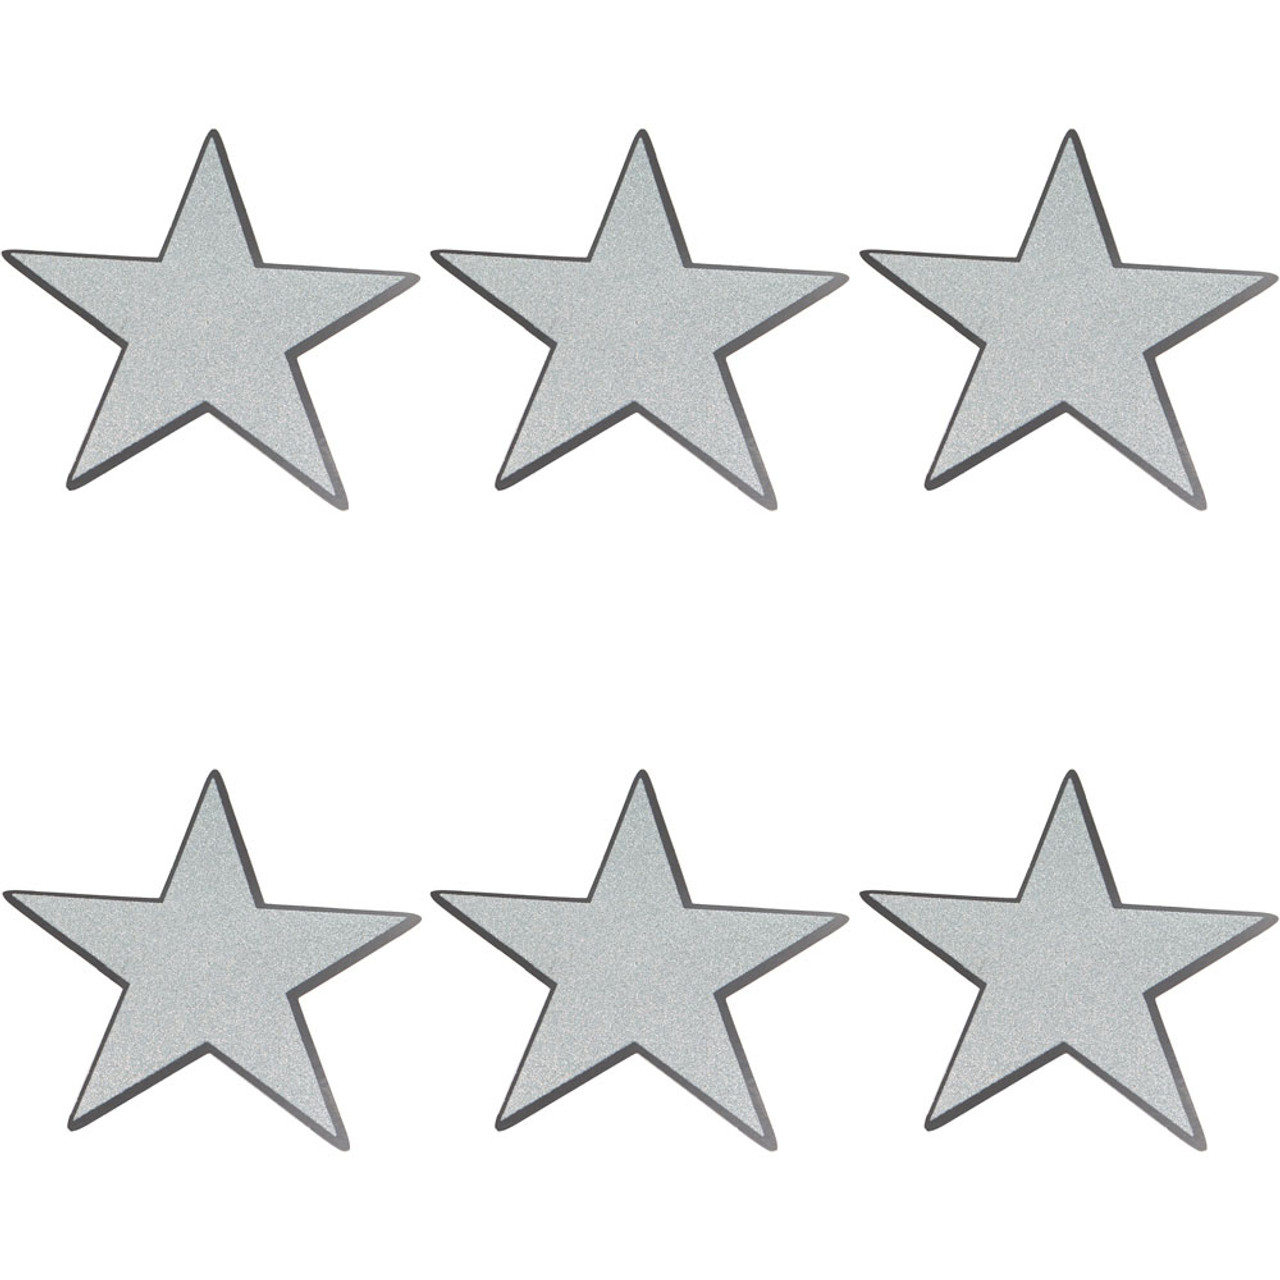 Small Silver Sparkle Star Stickers, 1/2 Star Shape